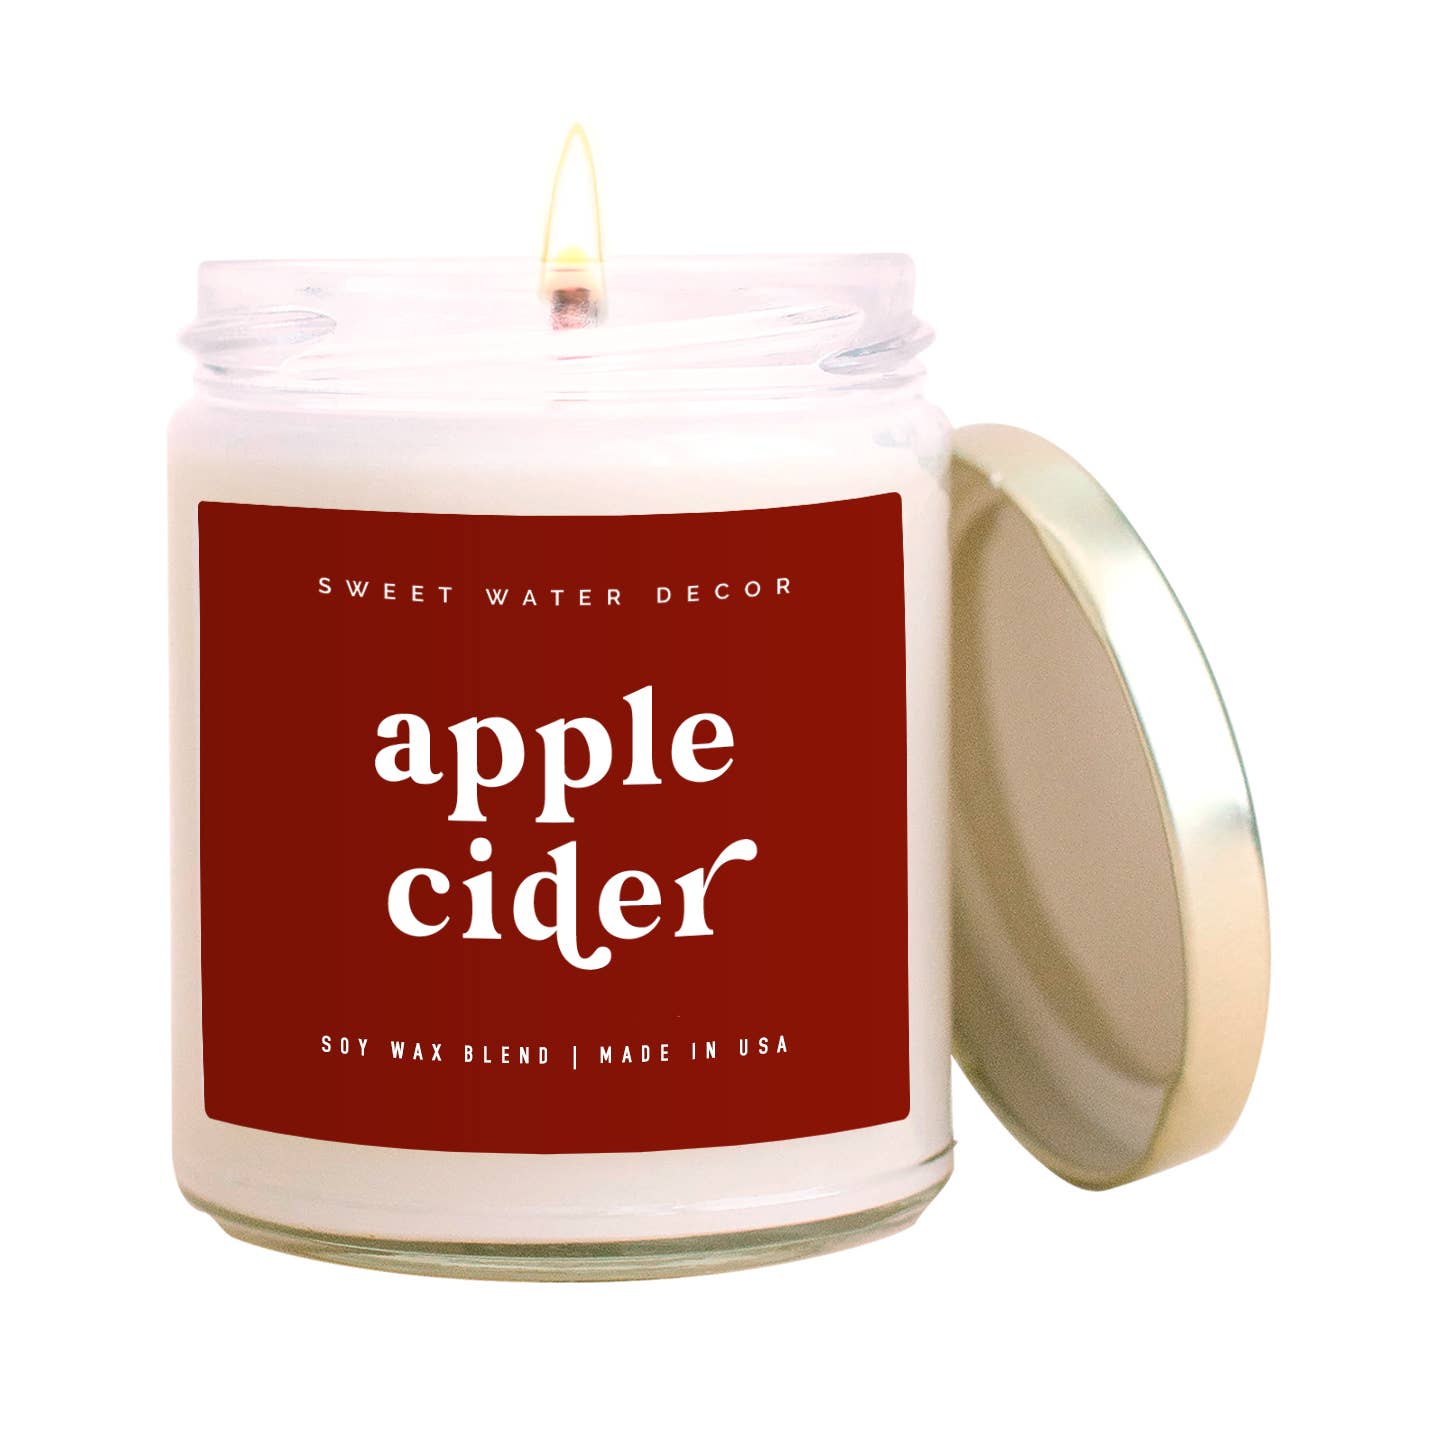 Sweet Water Decor - Apple Cider Soy Candle - Clear Jar - 9 oz